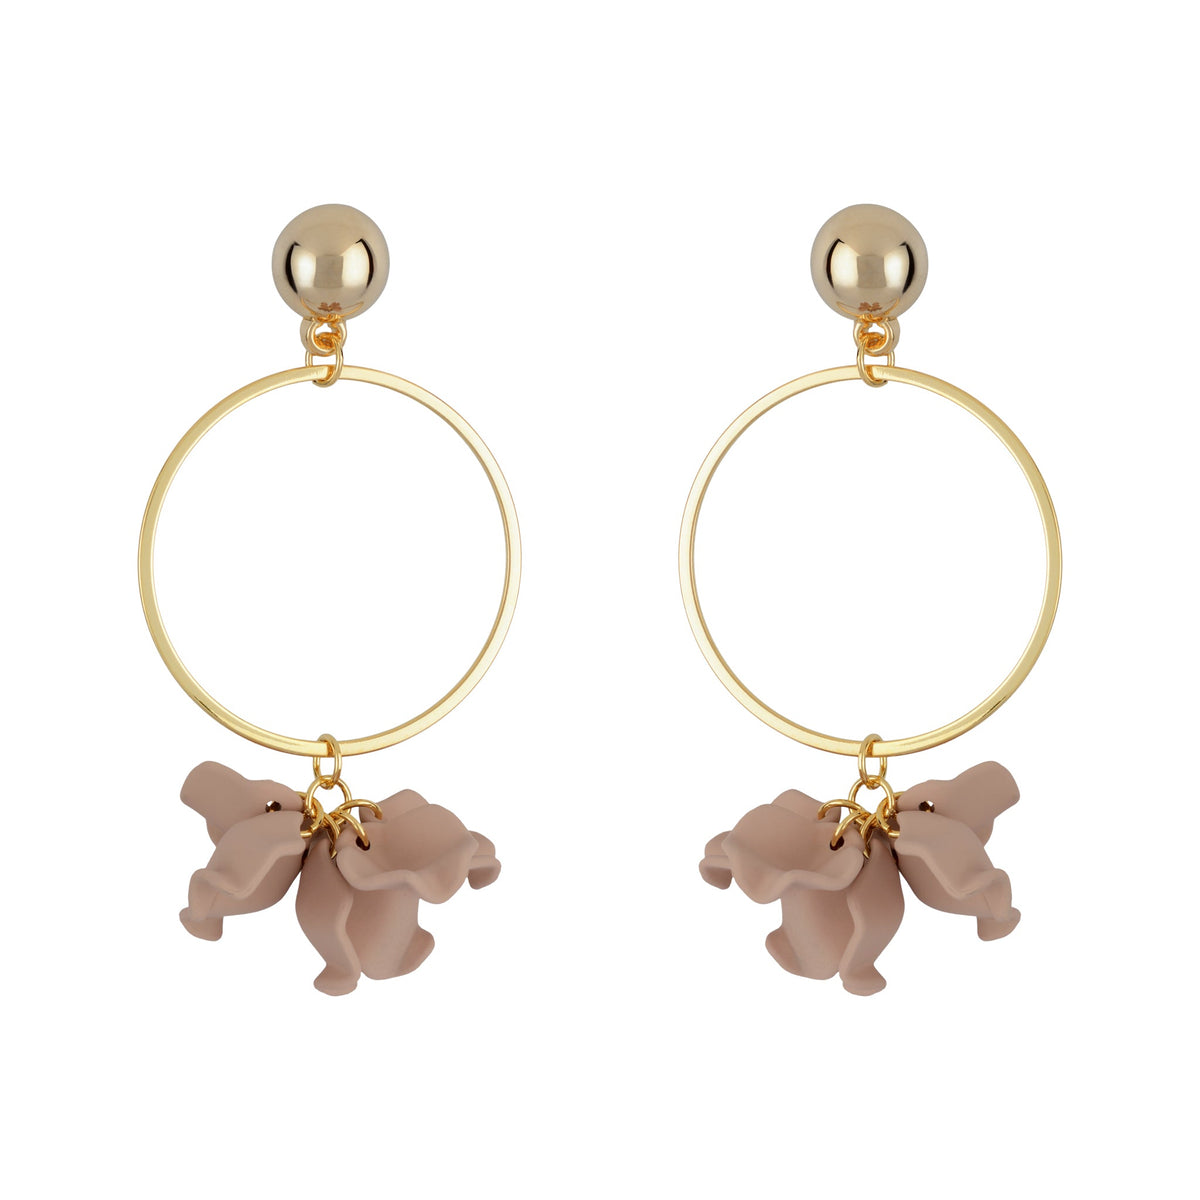 Suspended Gold Ring Petal Earrings - Nude